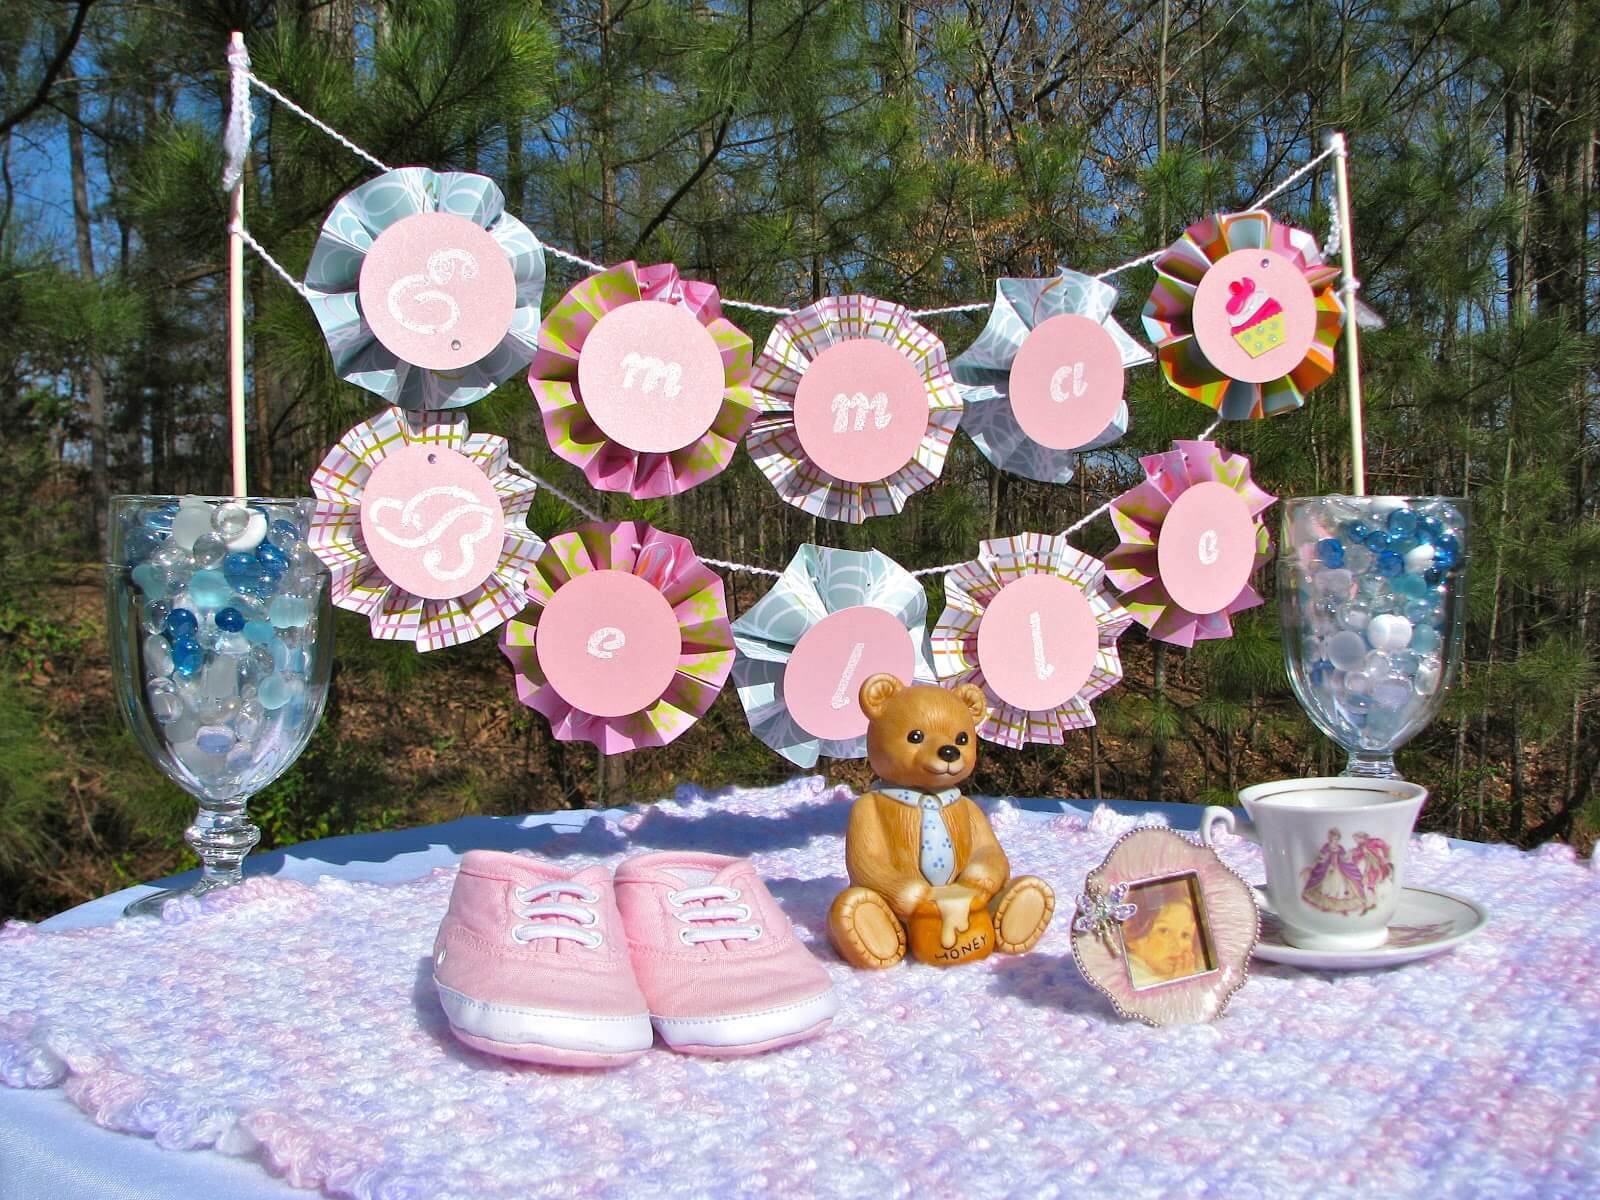 Full Size of Baby Shower:89+ Indulging Baby Shower Banner Picture Inspirations Baby Shower Banner Baby Shower Giveaways Baby Shower Baskets Baby Shower Hashtag Ideas Baby Shower Food Lots Of Baby Shower Banner Ideas Decorations